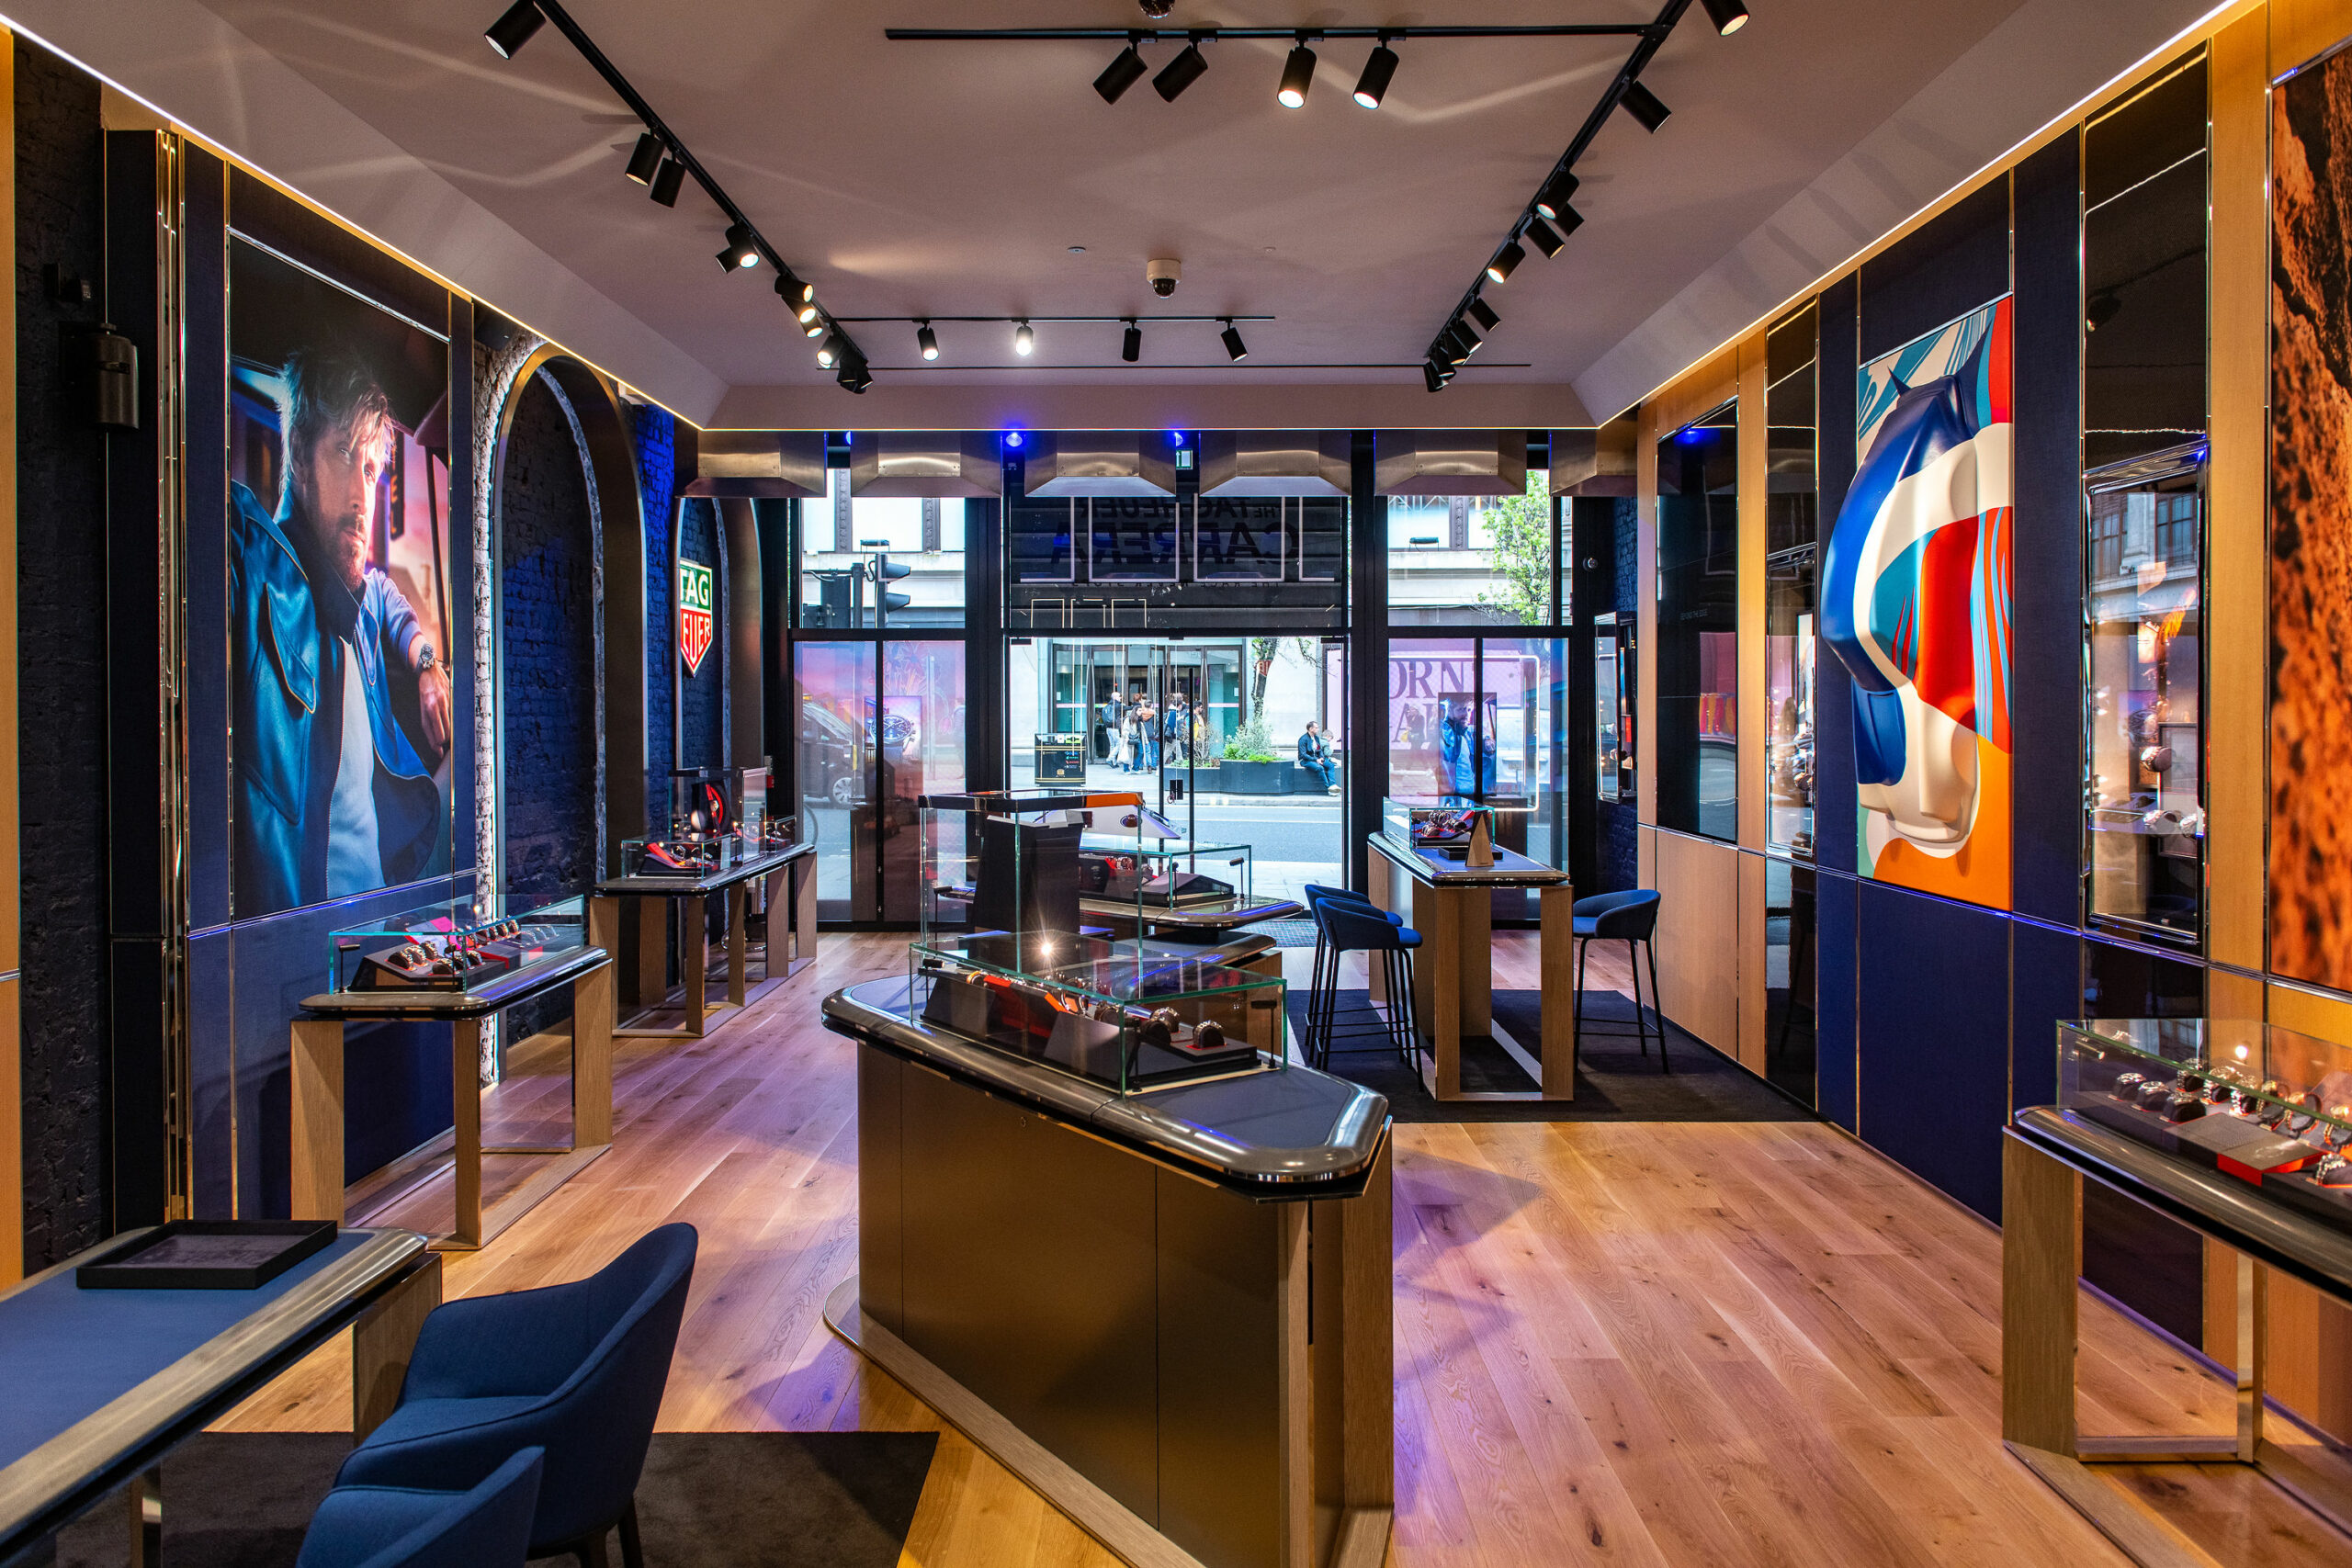 Tag Heuer has reopened its flagship boutique on London’s Oxford Street with a makeover inspired by the brand’s motor-racing history.